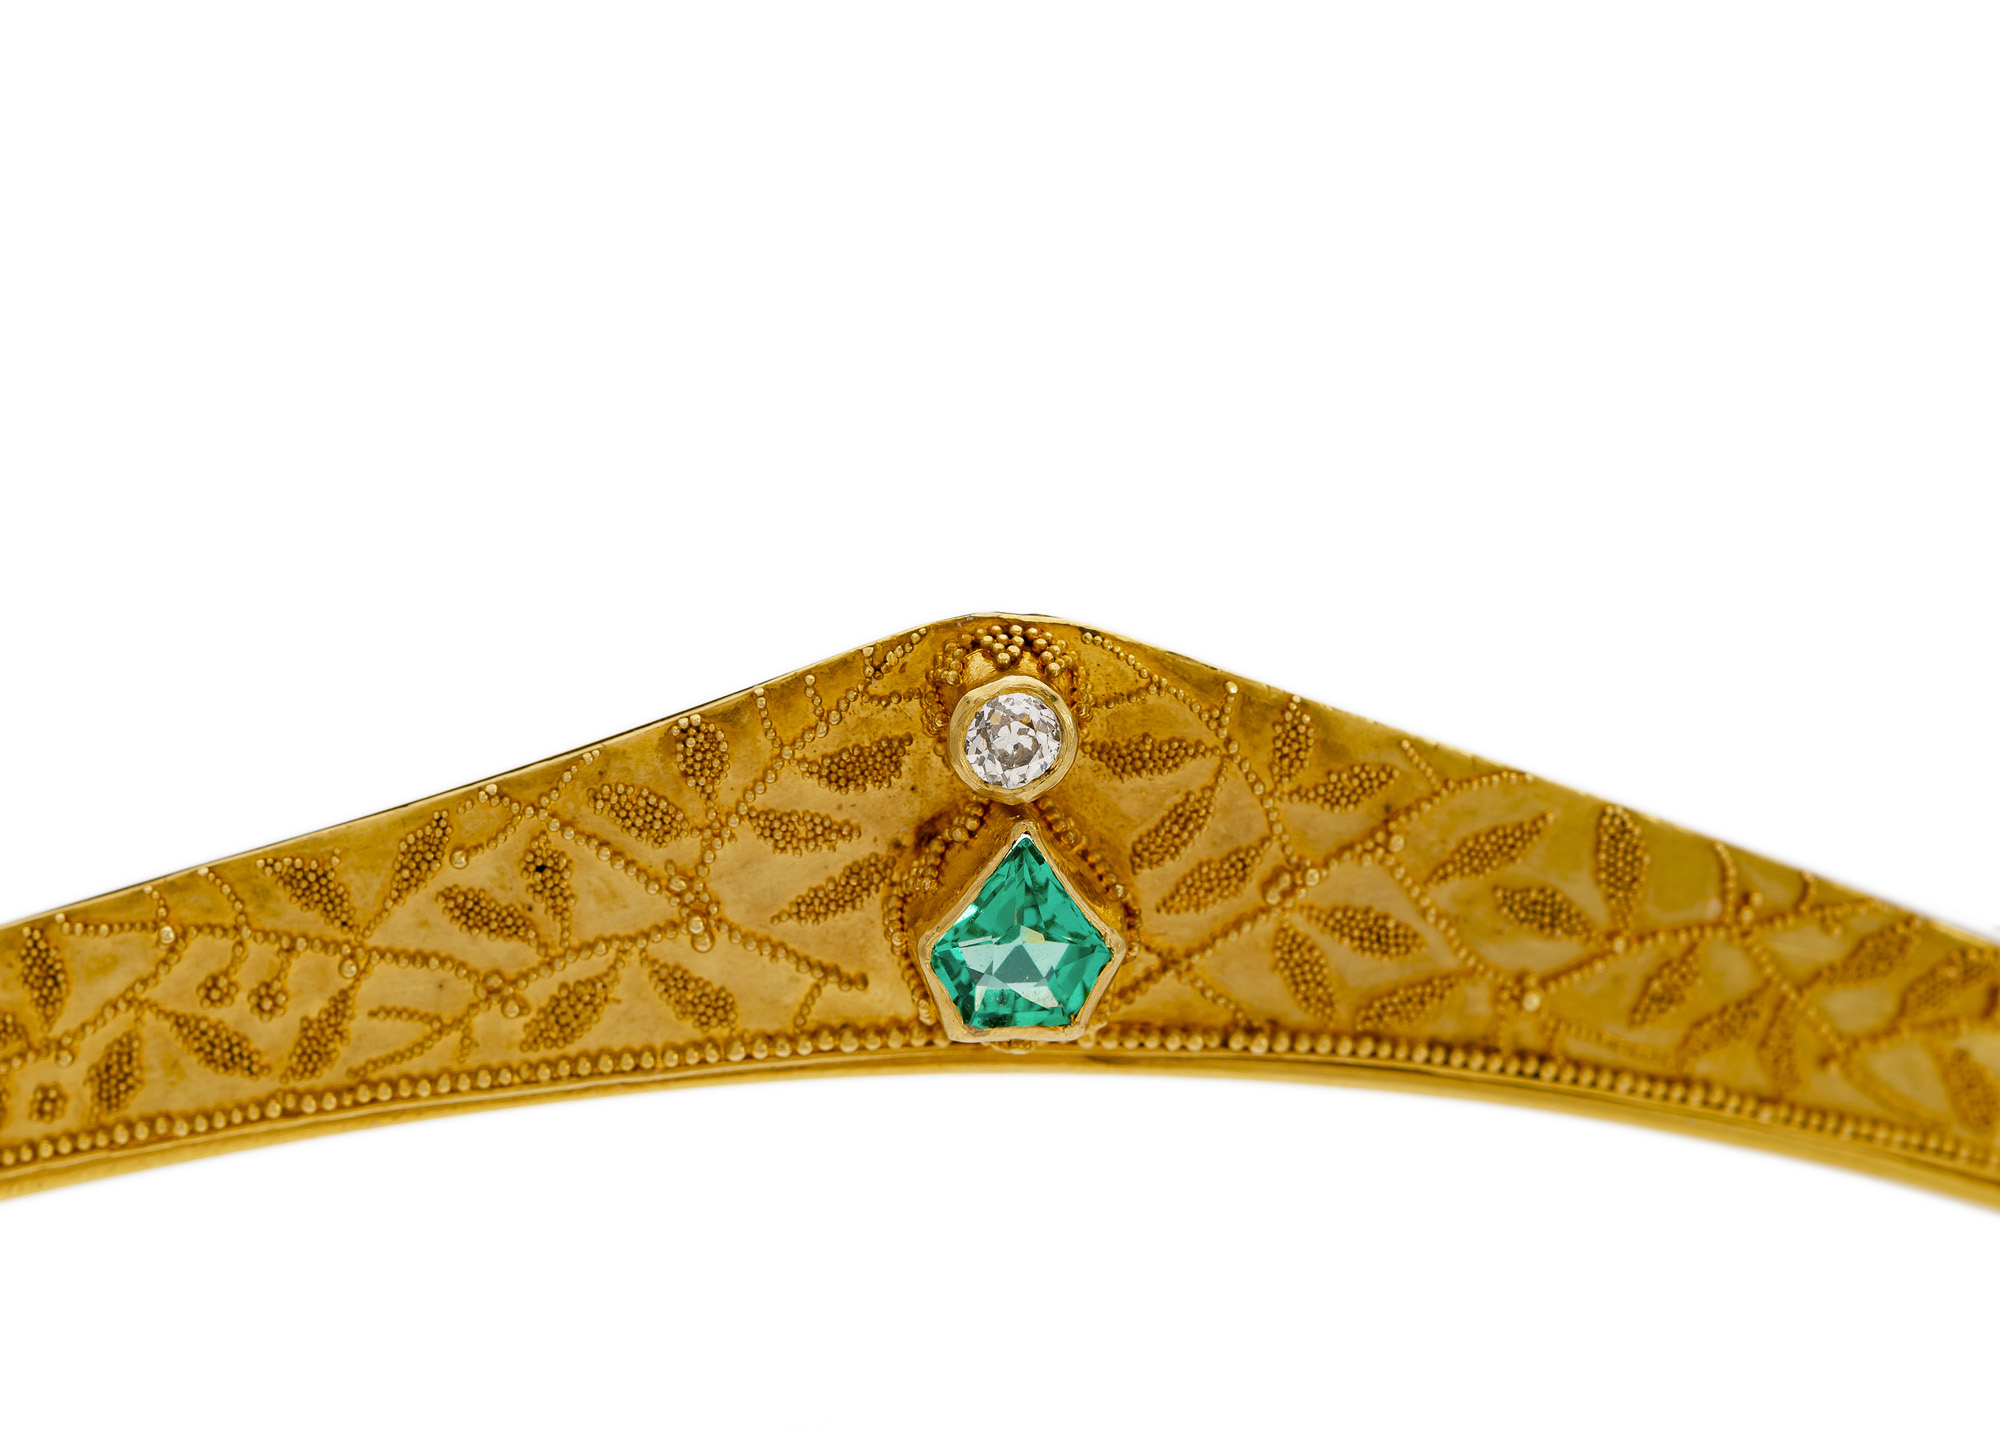 A FINE ANTIQUE-STYLE DIAMOND AND EMERALD SET GOLD TIARA WITH FINE GRANULATION - Image 5 of 9